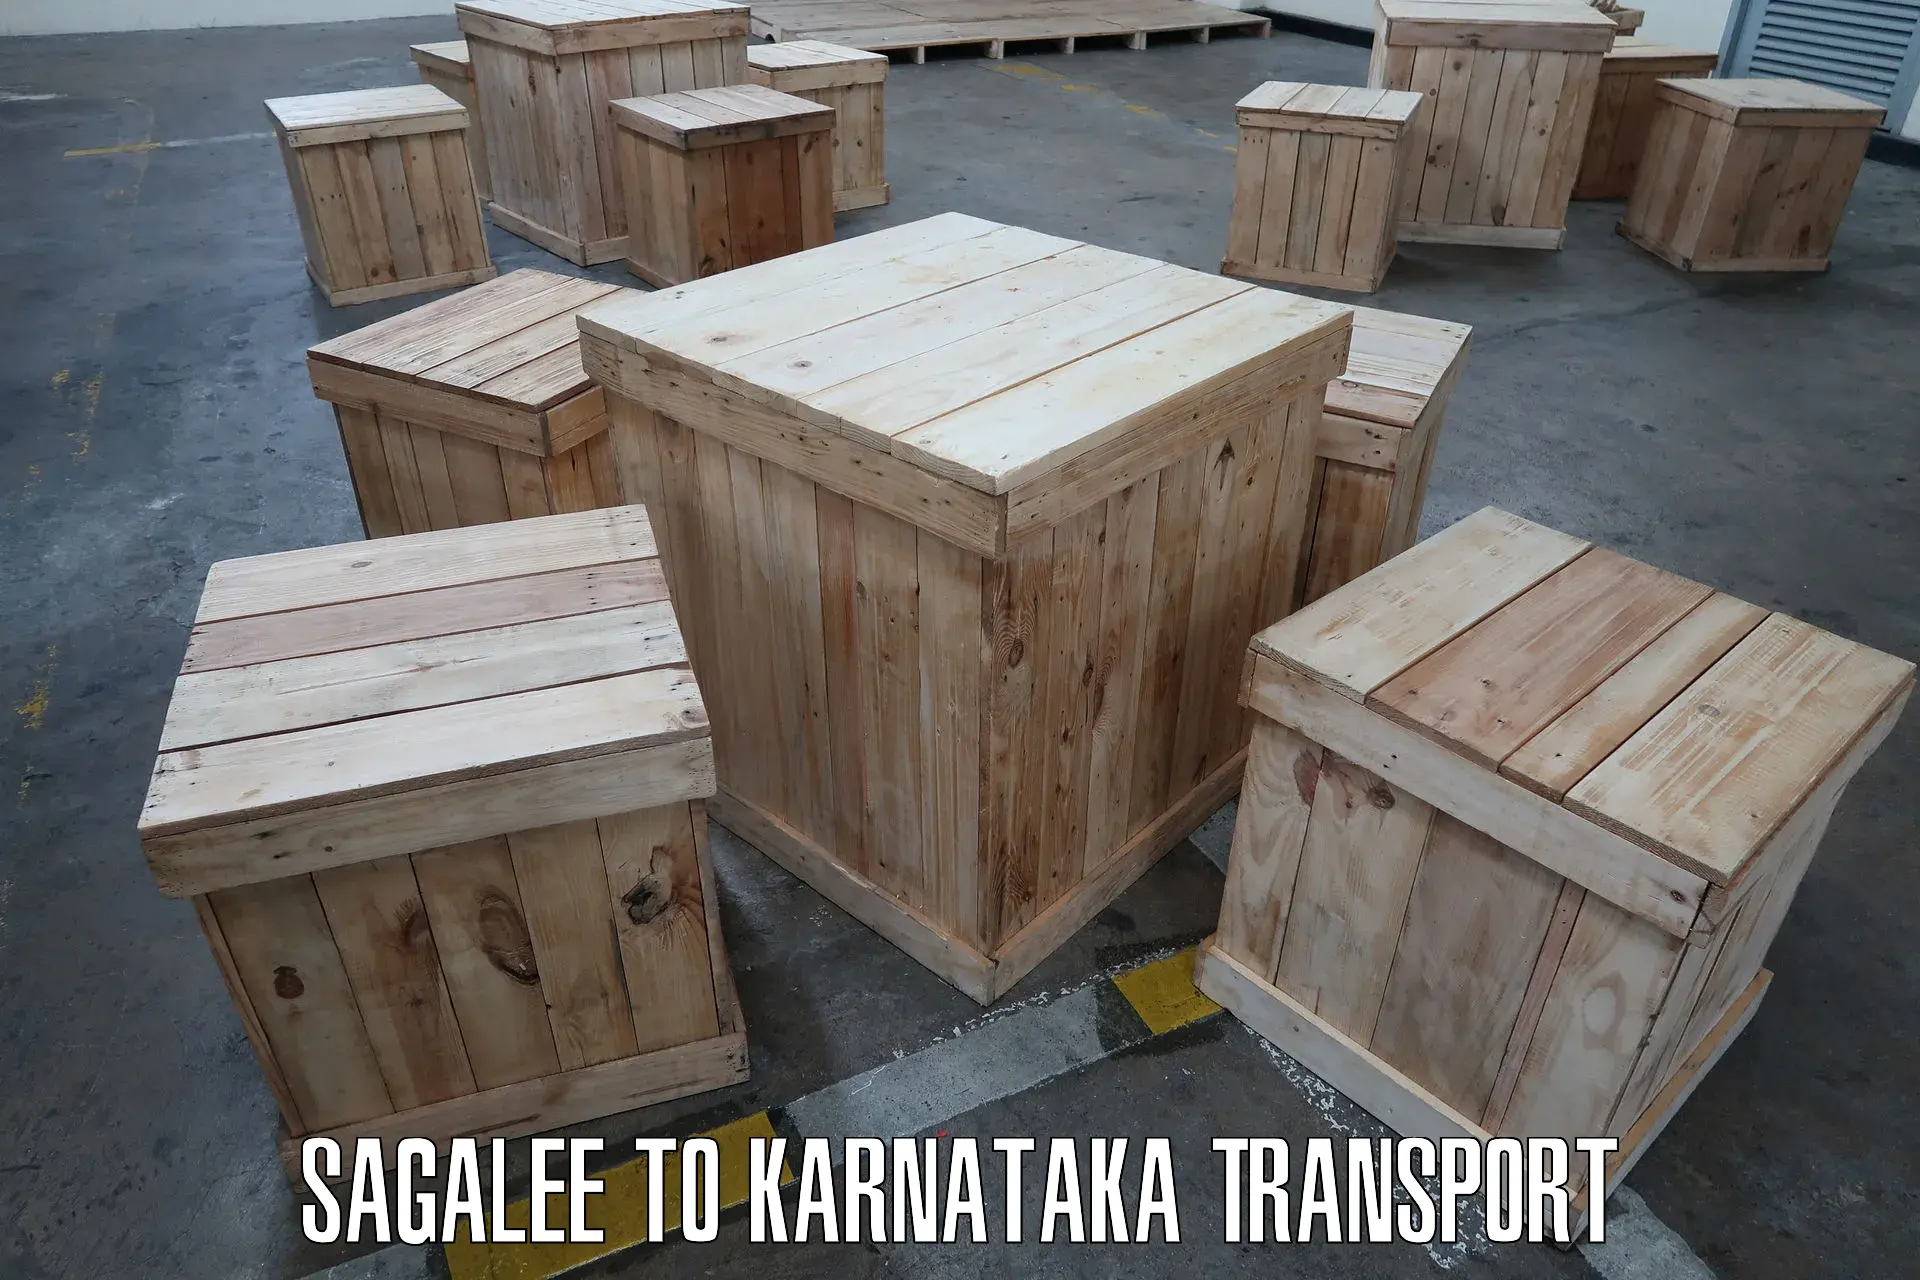 Air freight transport services Sagalee to Manipal